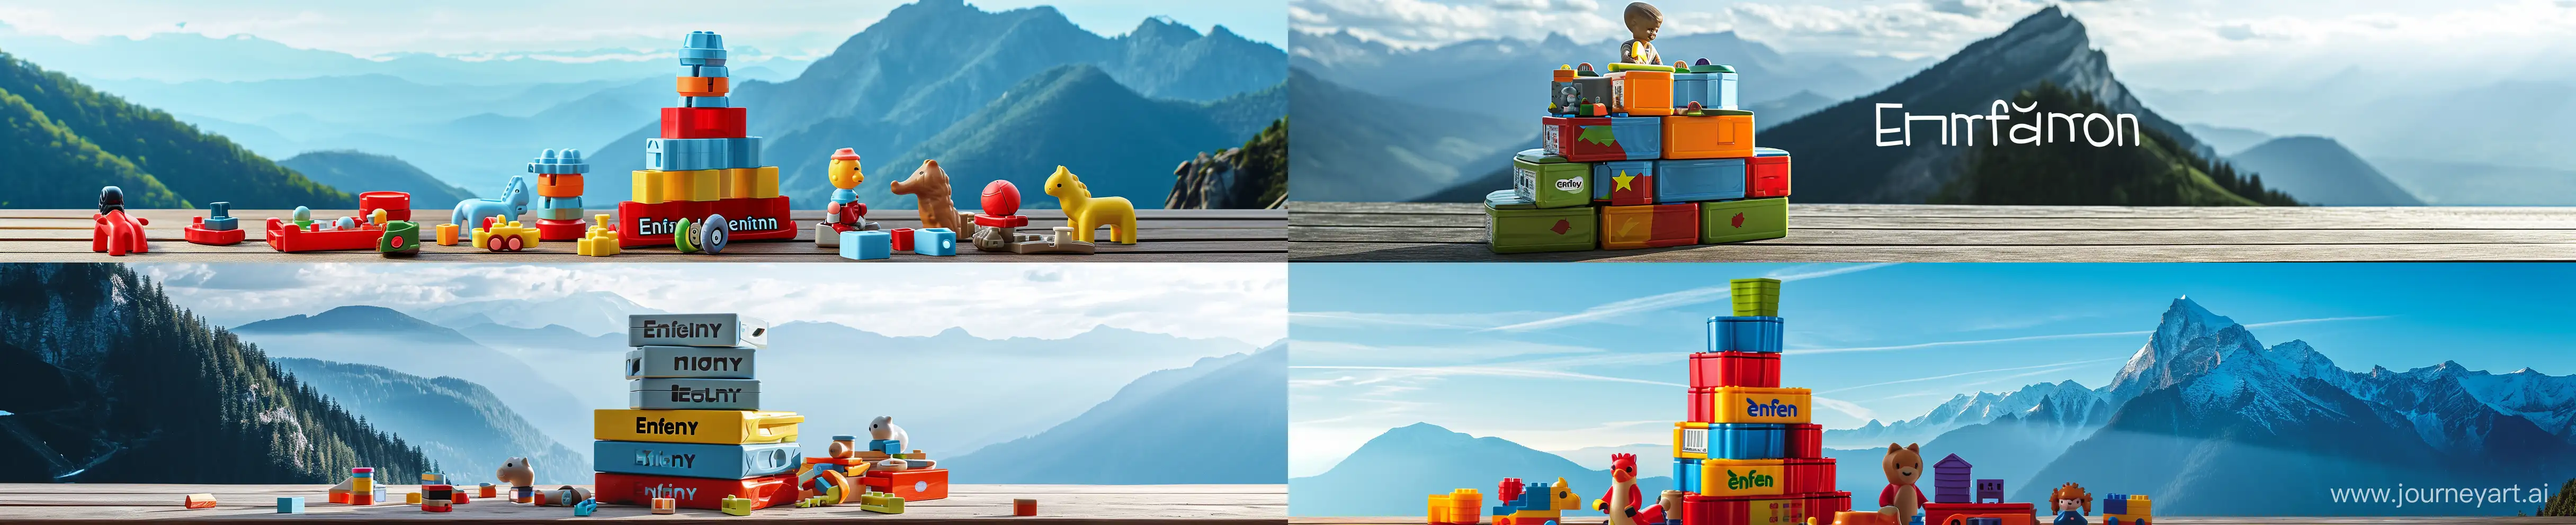 Enfant-Brand-Childrens-Sets-Stacked-on-Wooden-Table-with-Mountain-View